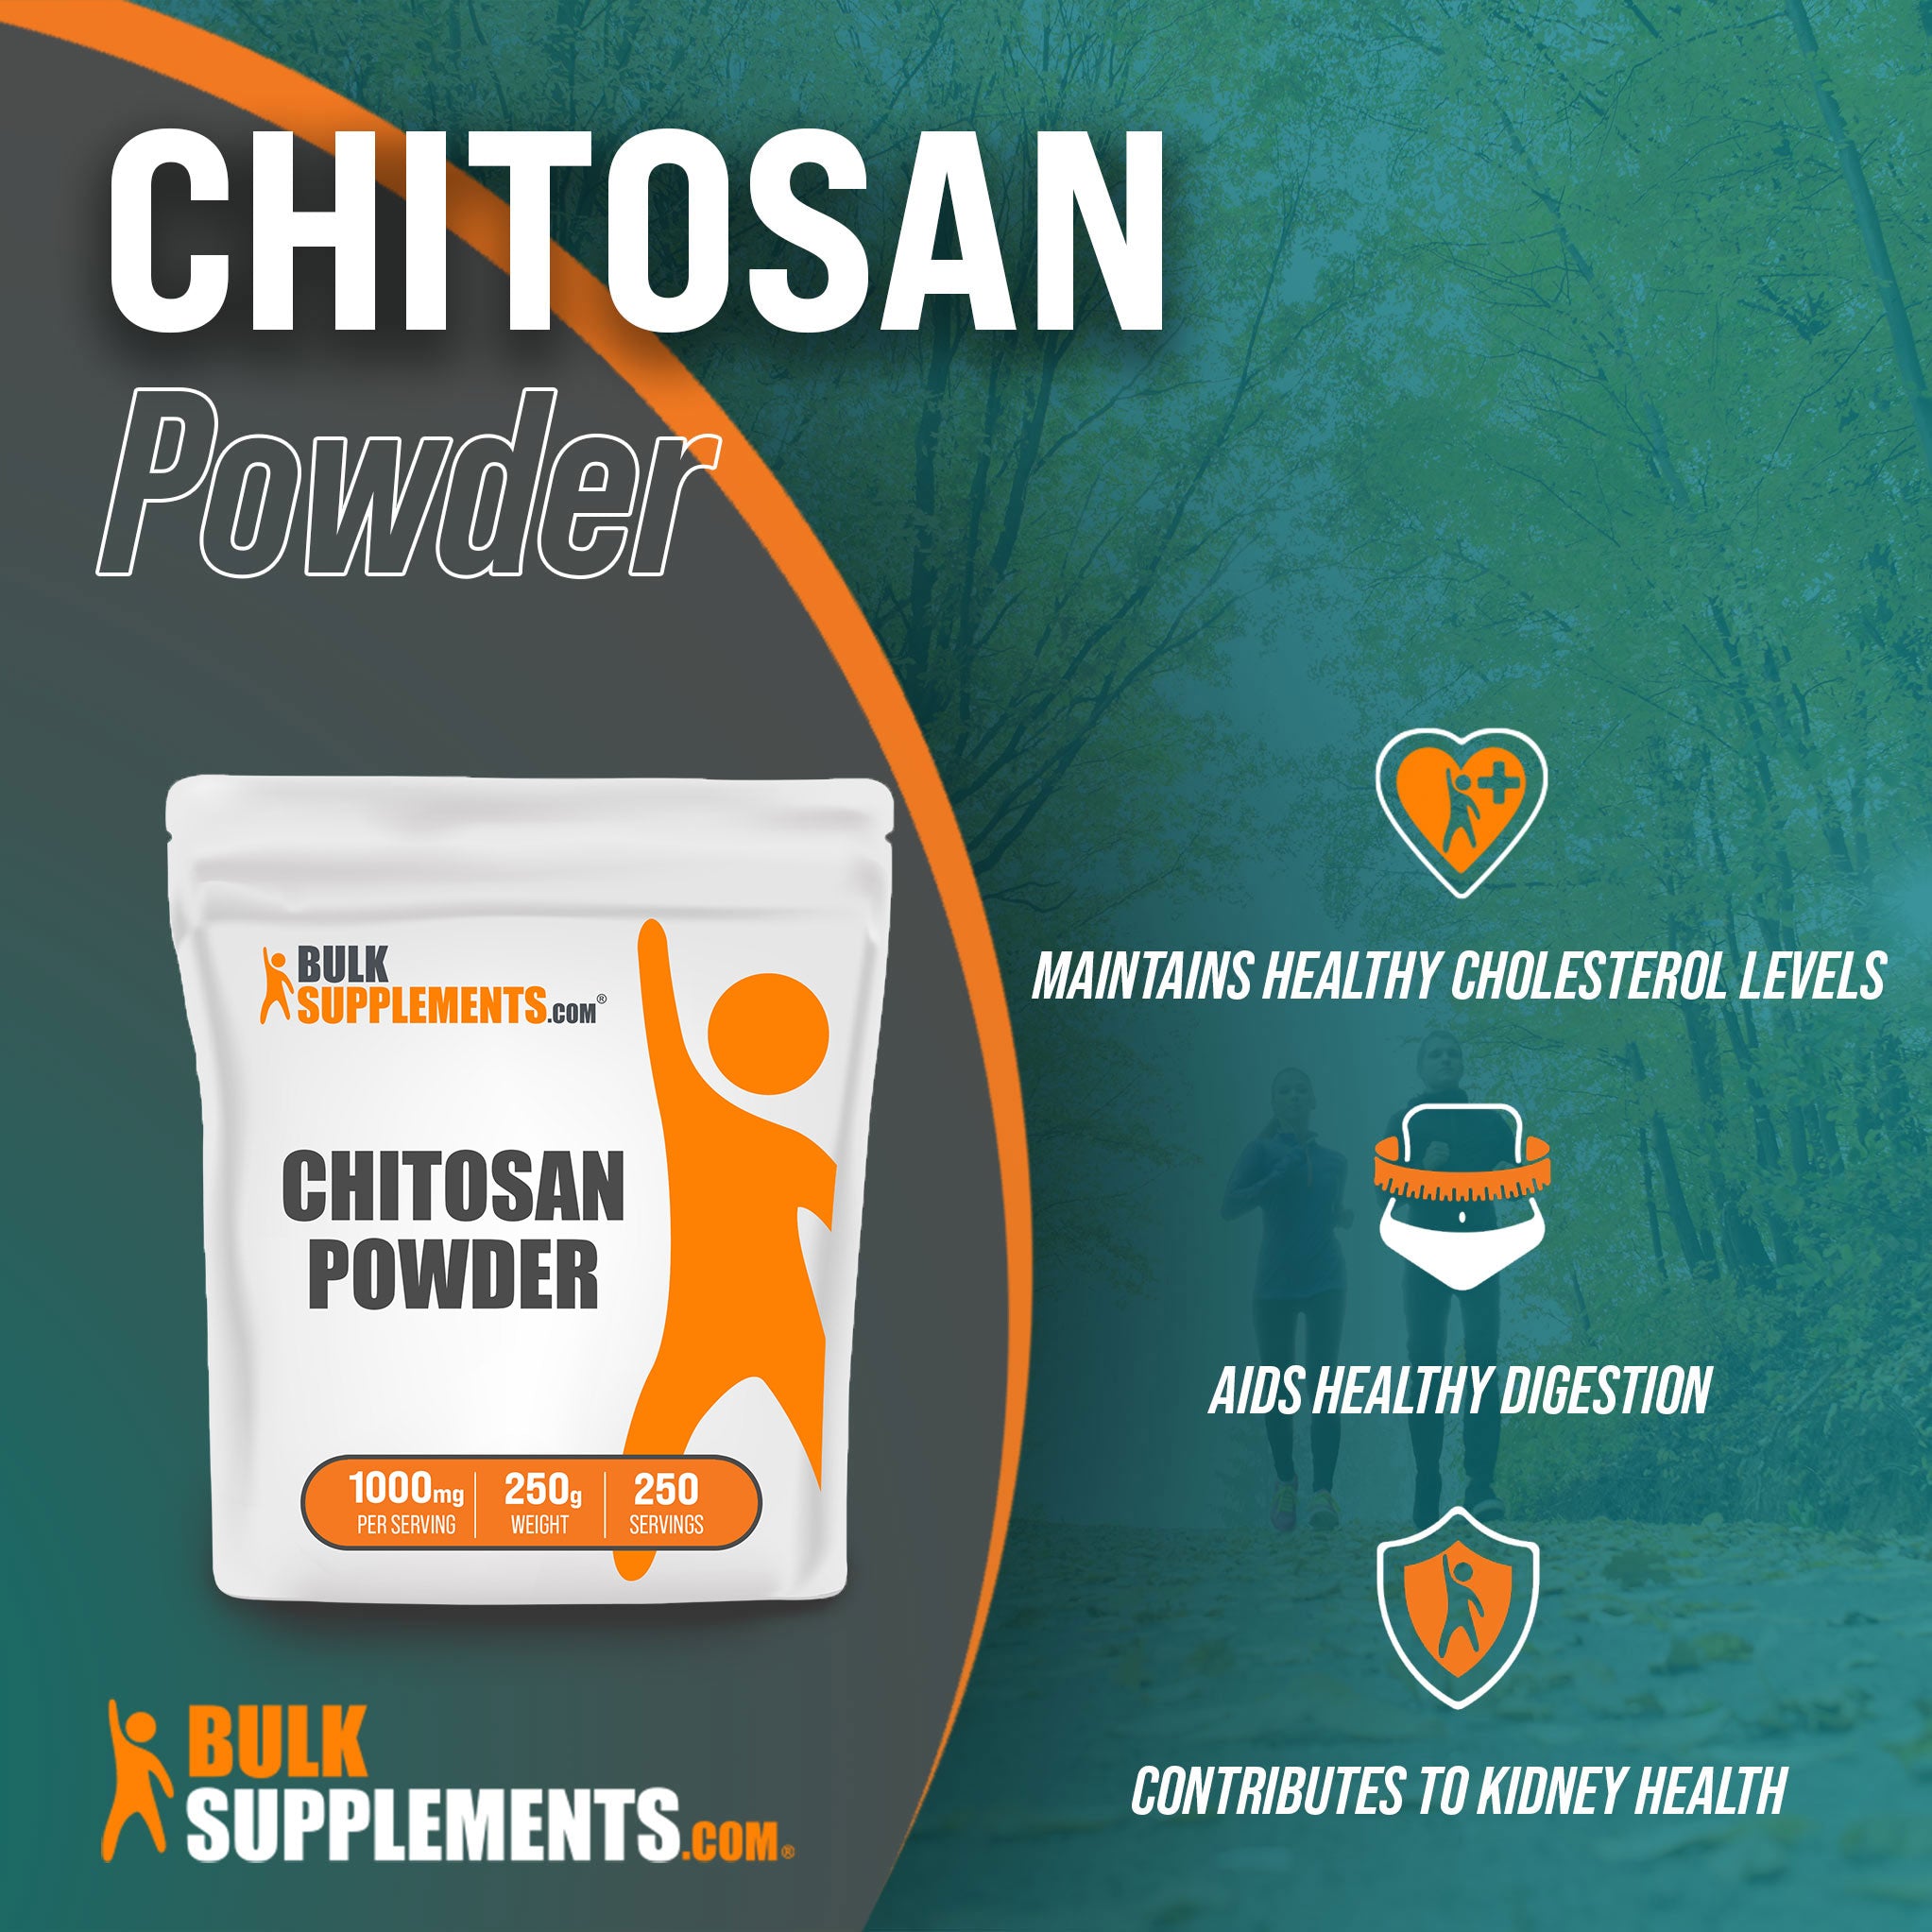 250g Chitosan Powder fiber supplement; maintains healthy cholesterol levels, aids healthy digestion, contributes to kidney health